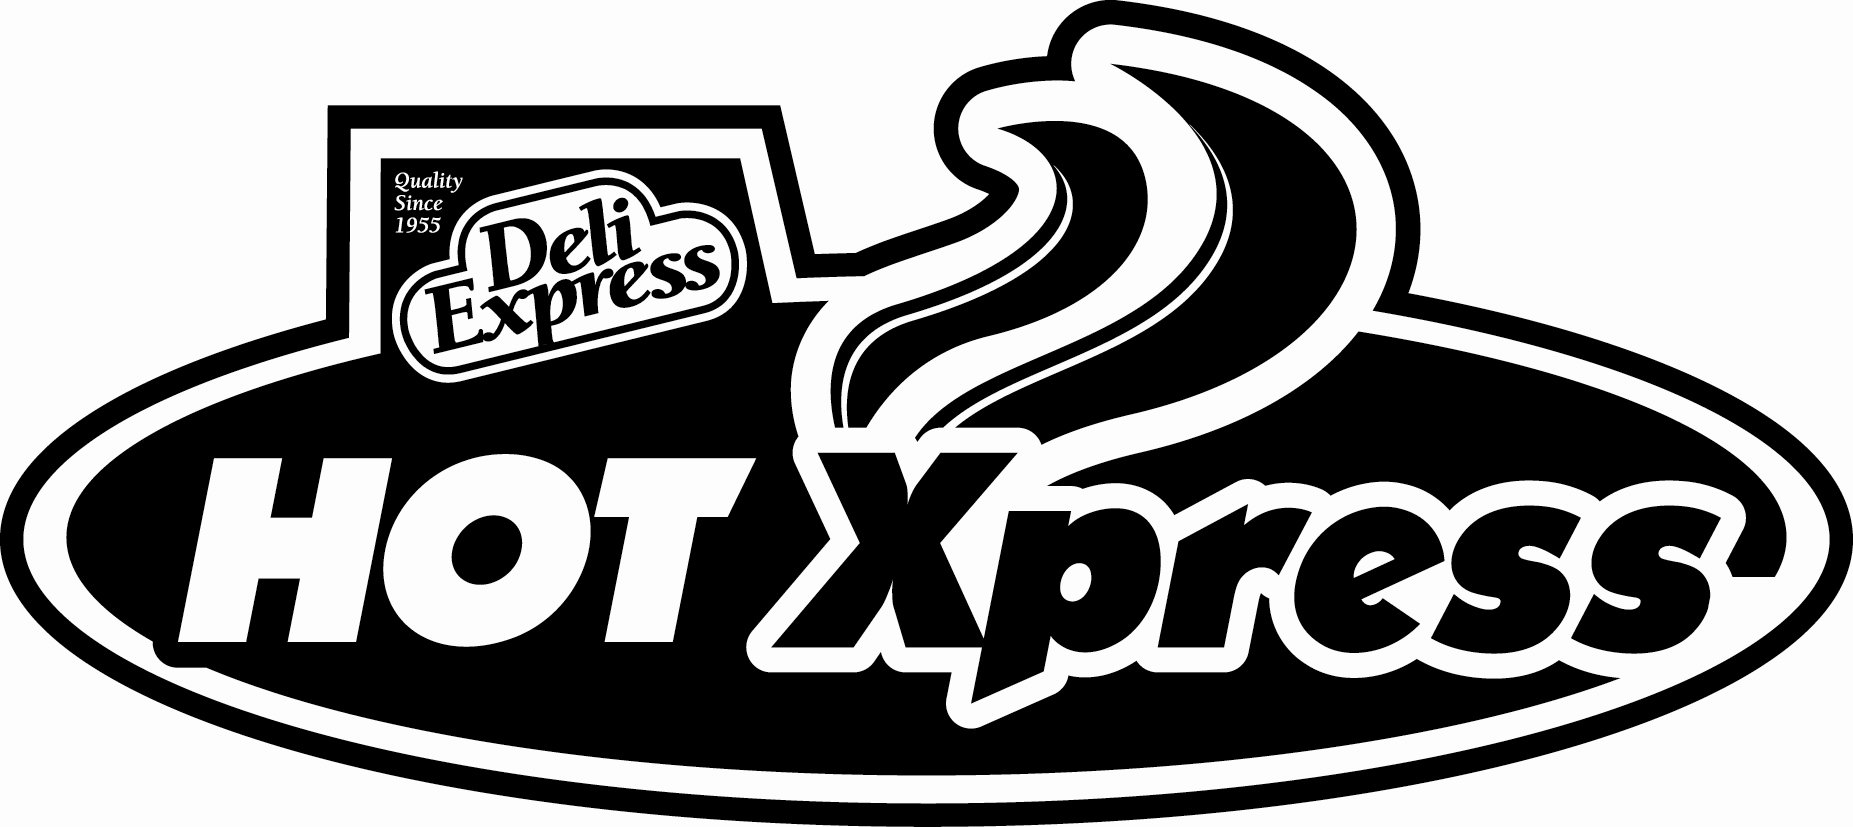  QUALITY SINCE 1955 DELI EXPRESS HOT XPRESS